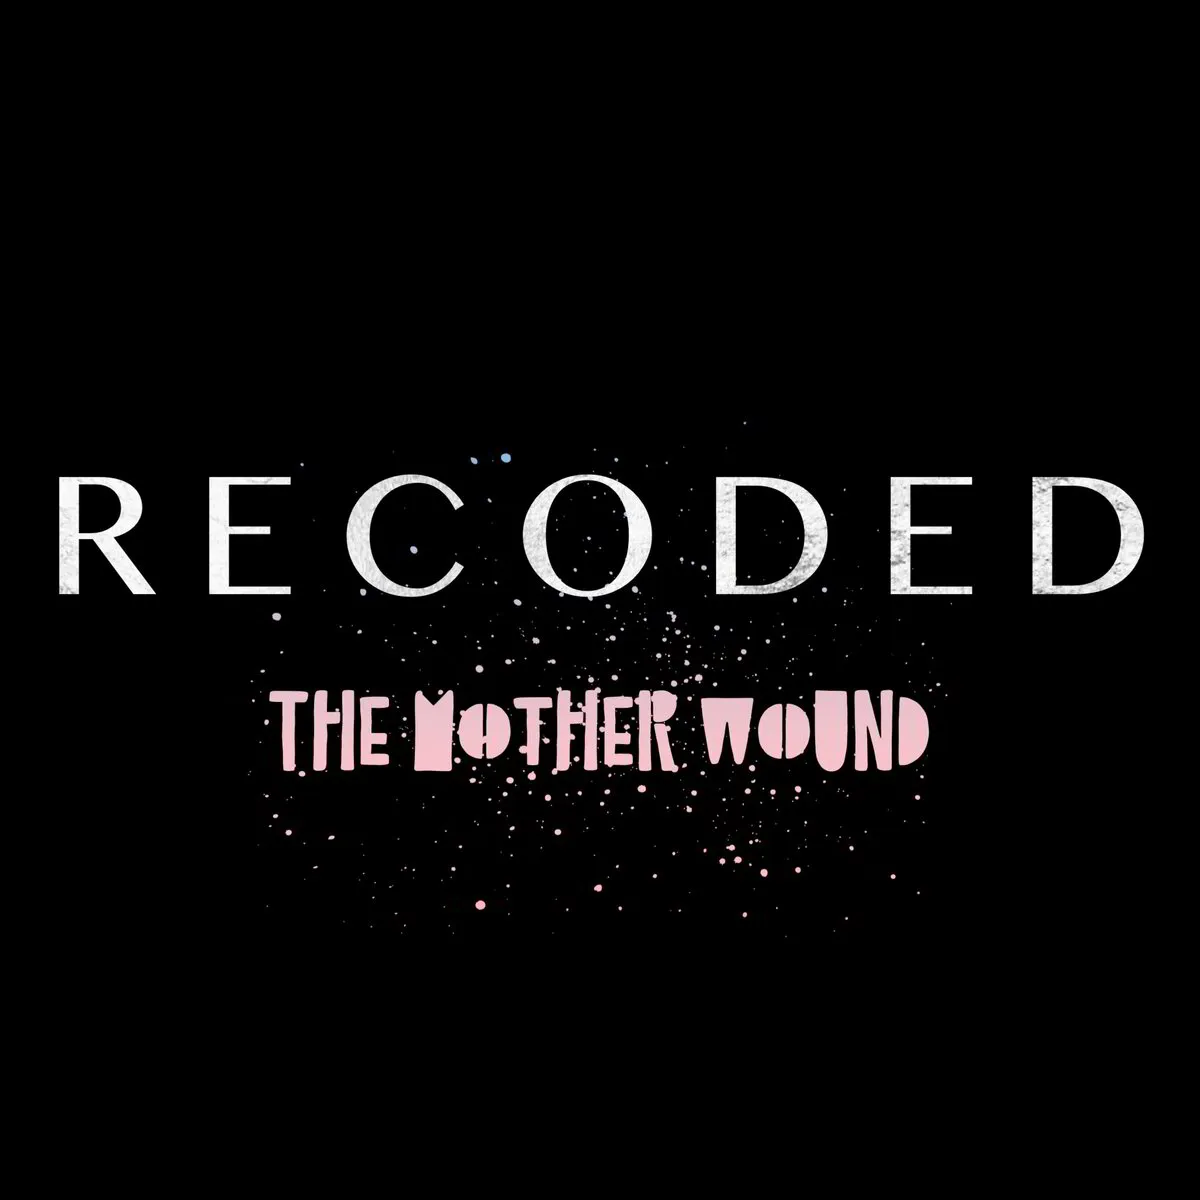 Recoded - The Mother Wound